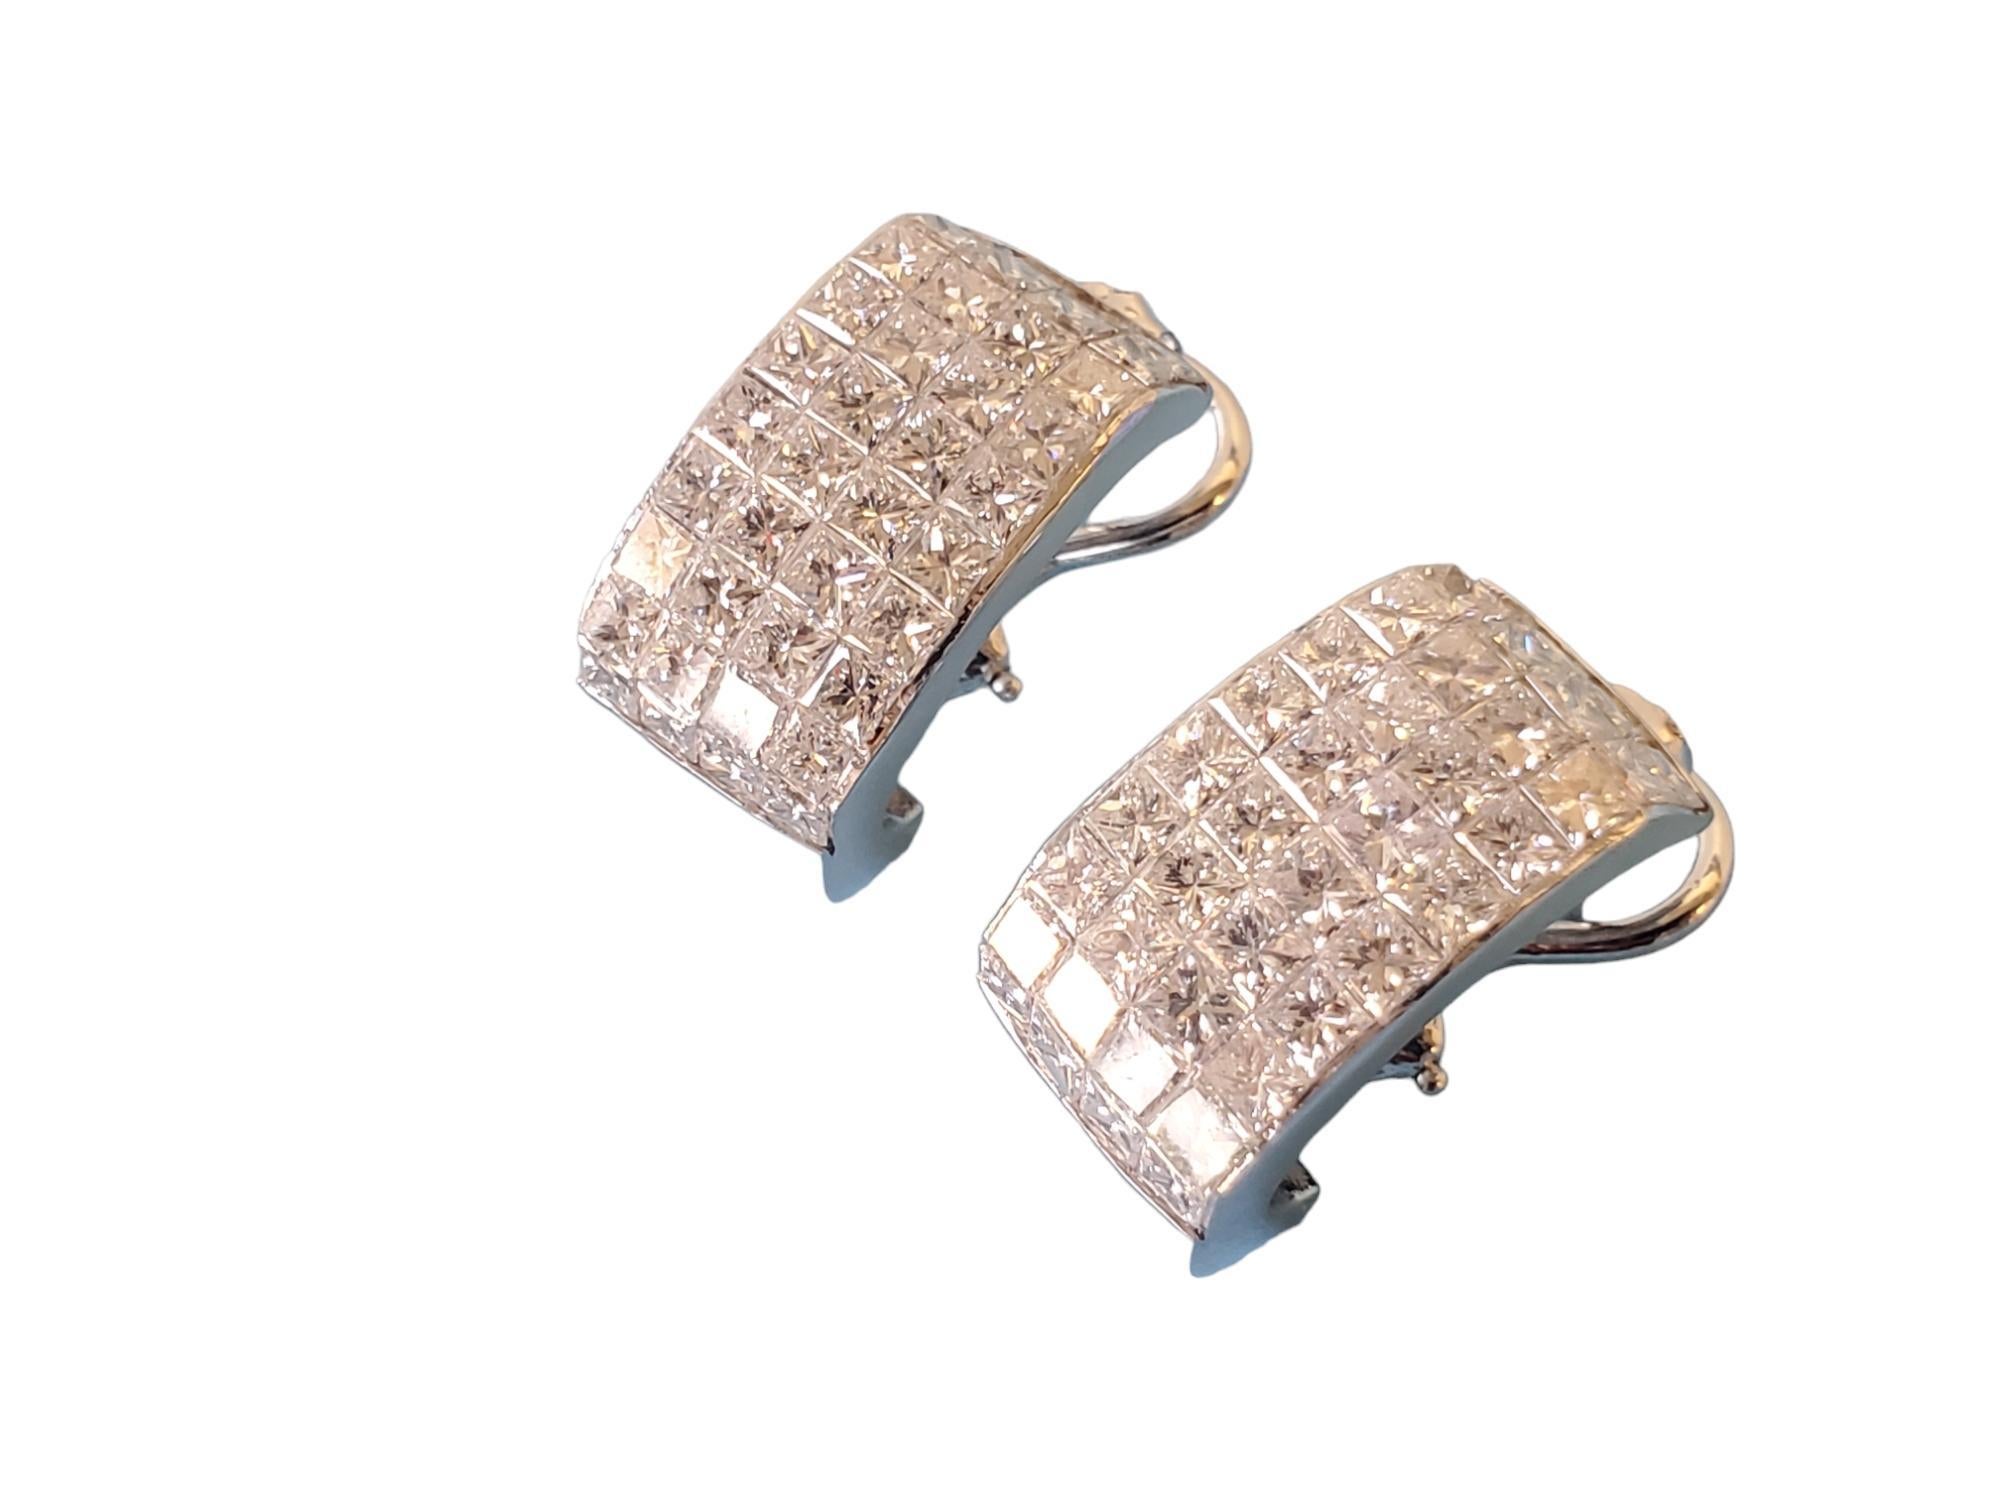 Listed are these amazing invisible set diamond earrings. These earrings feature 40 invisible set princess cut diamonds in each earring for an approximate total weight of 6.5 carats for the set. The diamonds are white GH VS-SI quality very nice